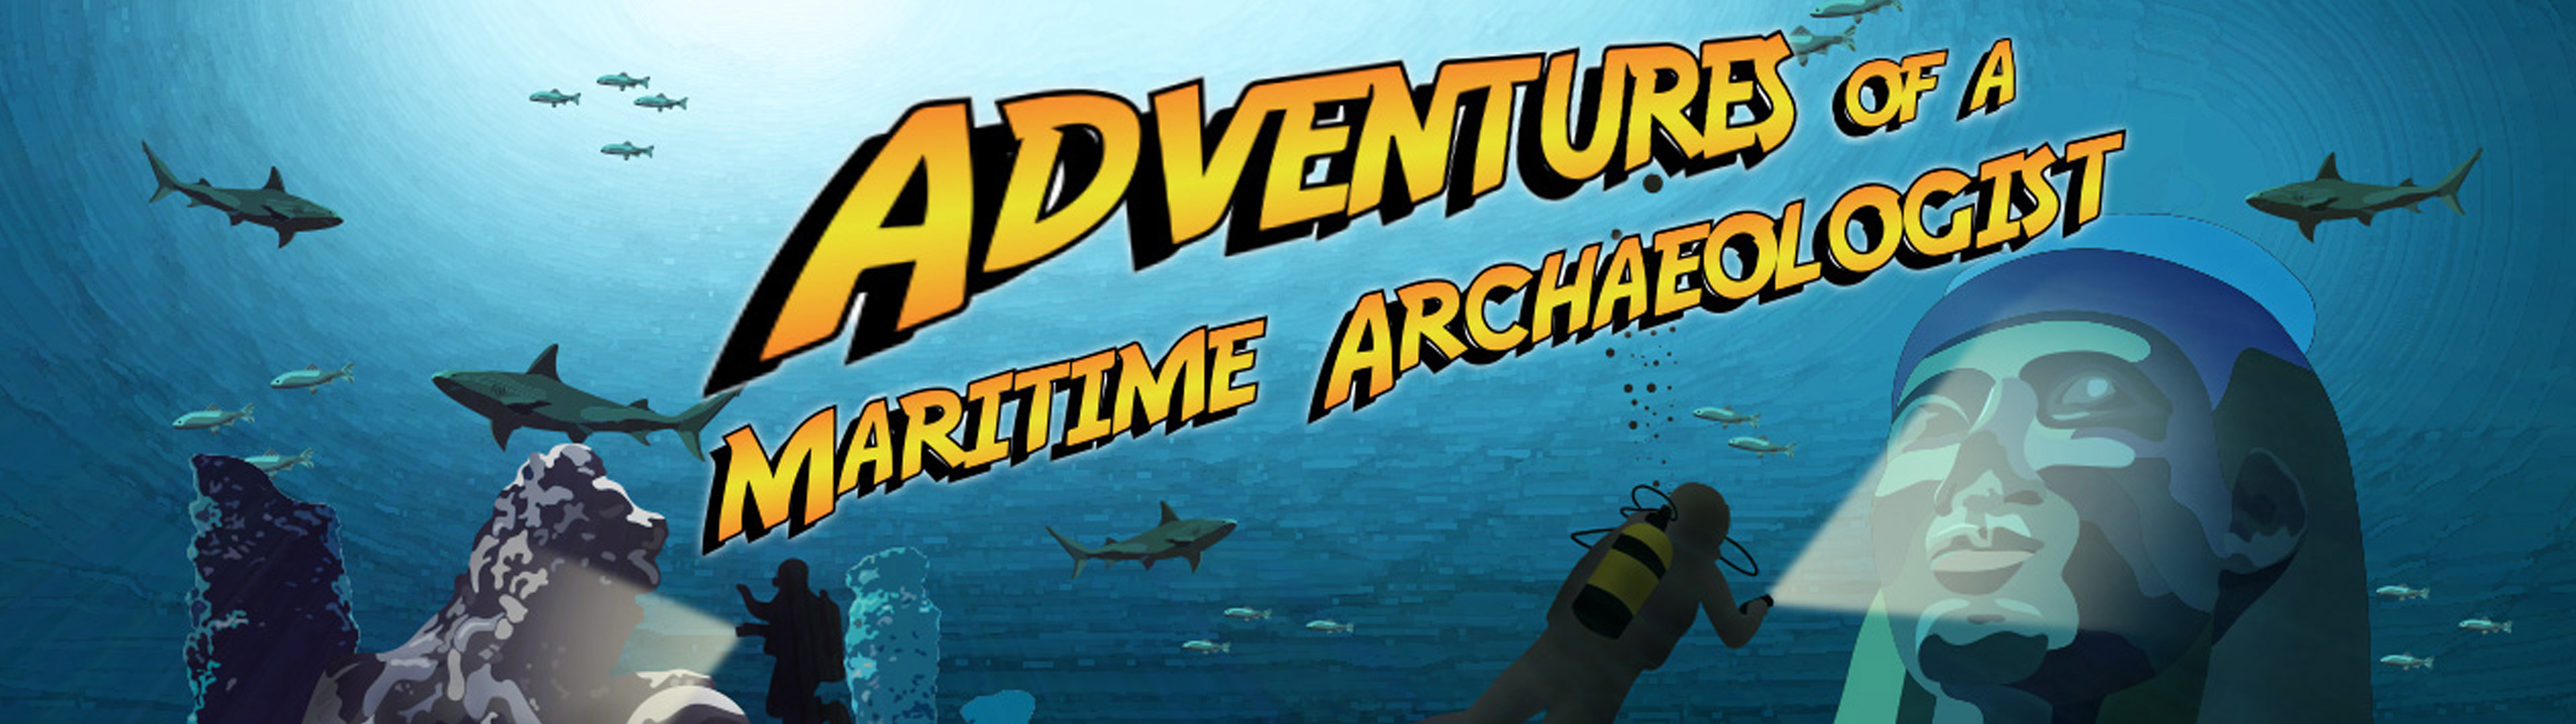 Adventures of a Maritime Archaeologist